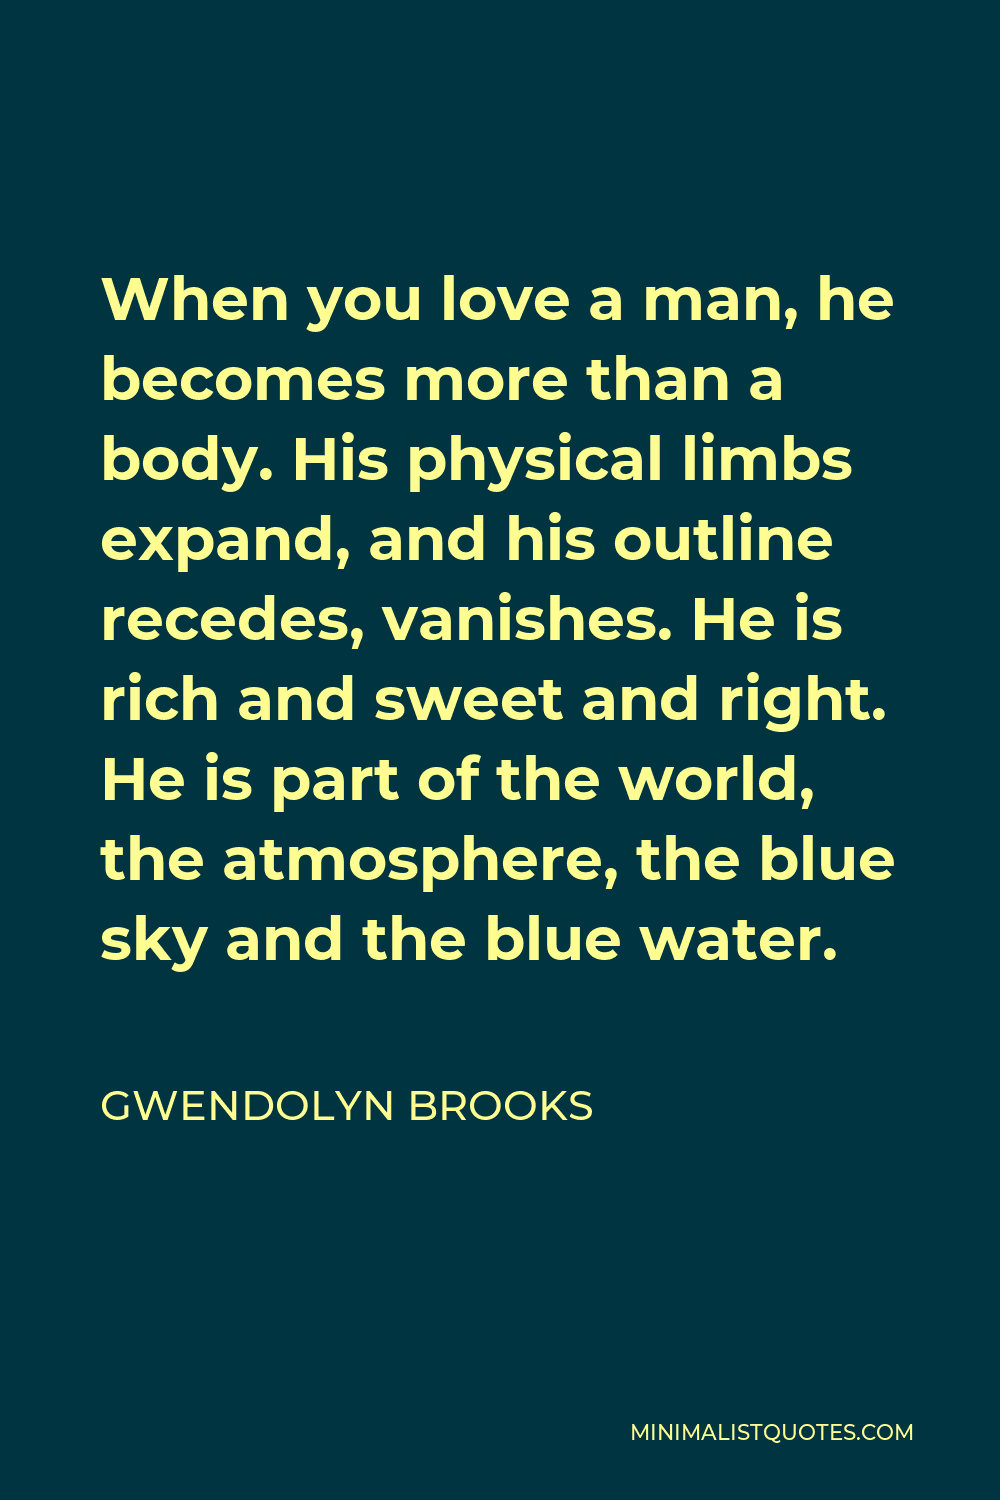 Gwendolyn Brooks Quote - When you love a man, he becomes more than a body. His physical limbs expand, and his outline recedes, vanishes. He is rich and sweet and right. He is part of the world, the atmosphere, the blue sky and the blue water.